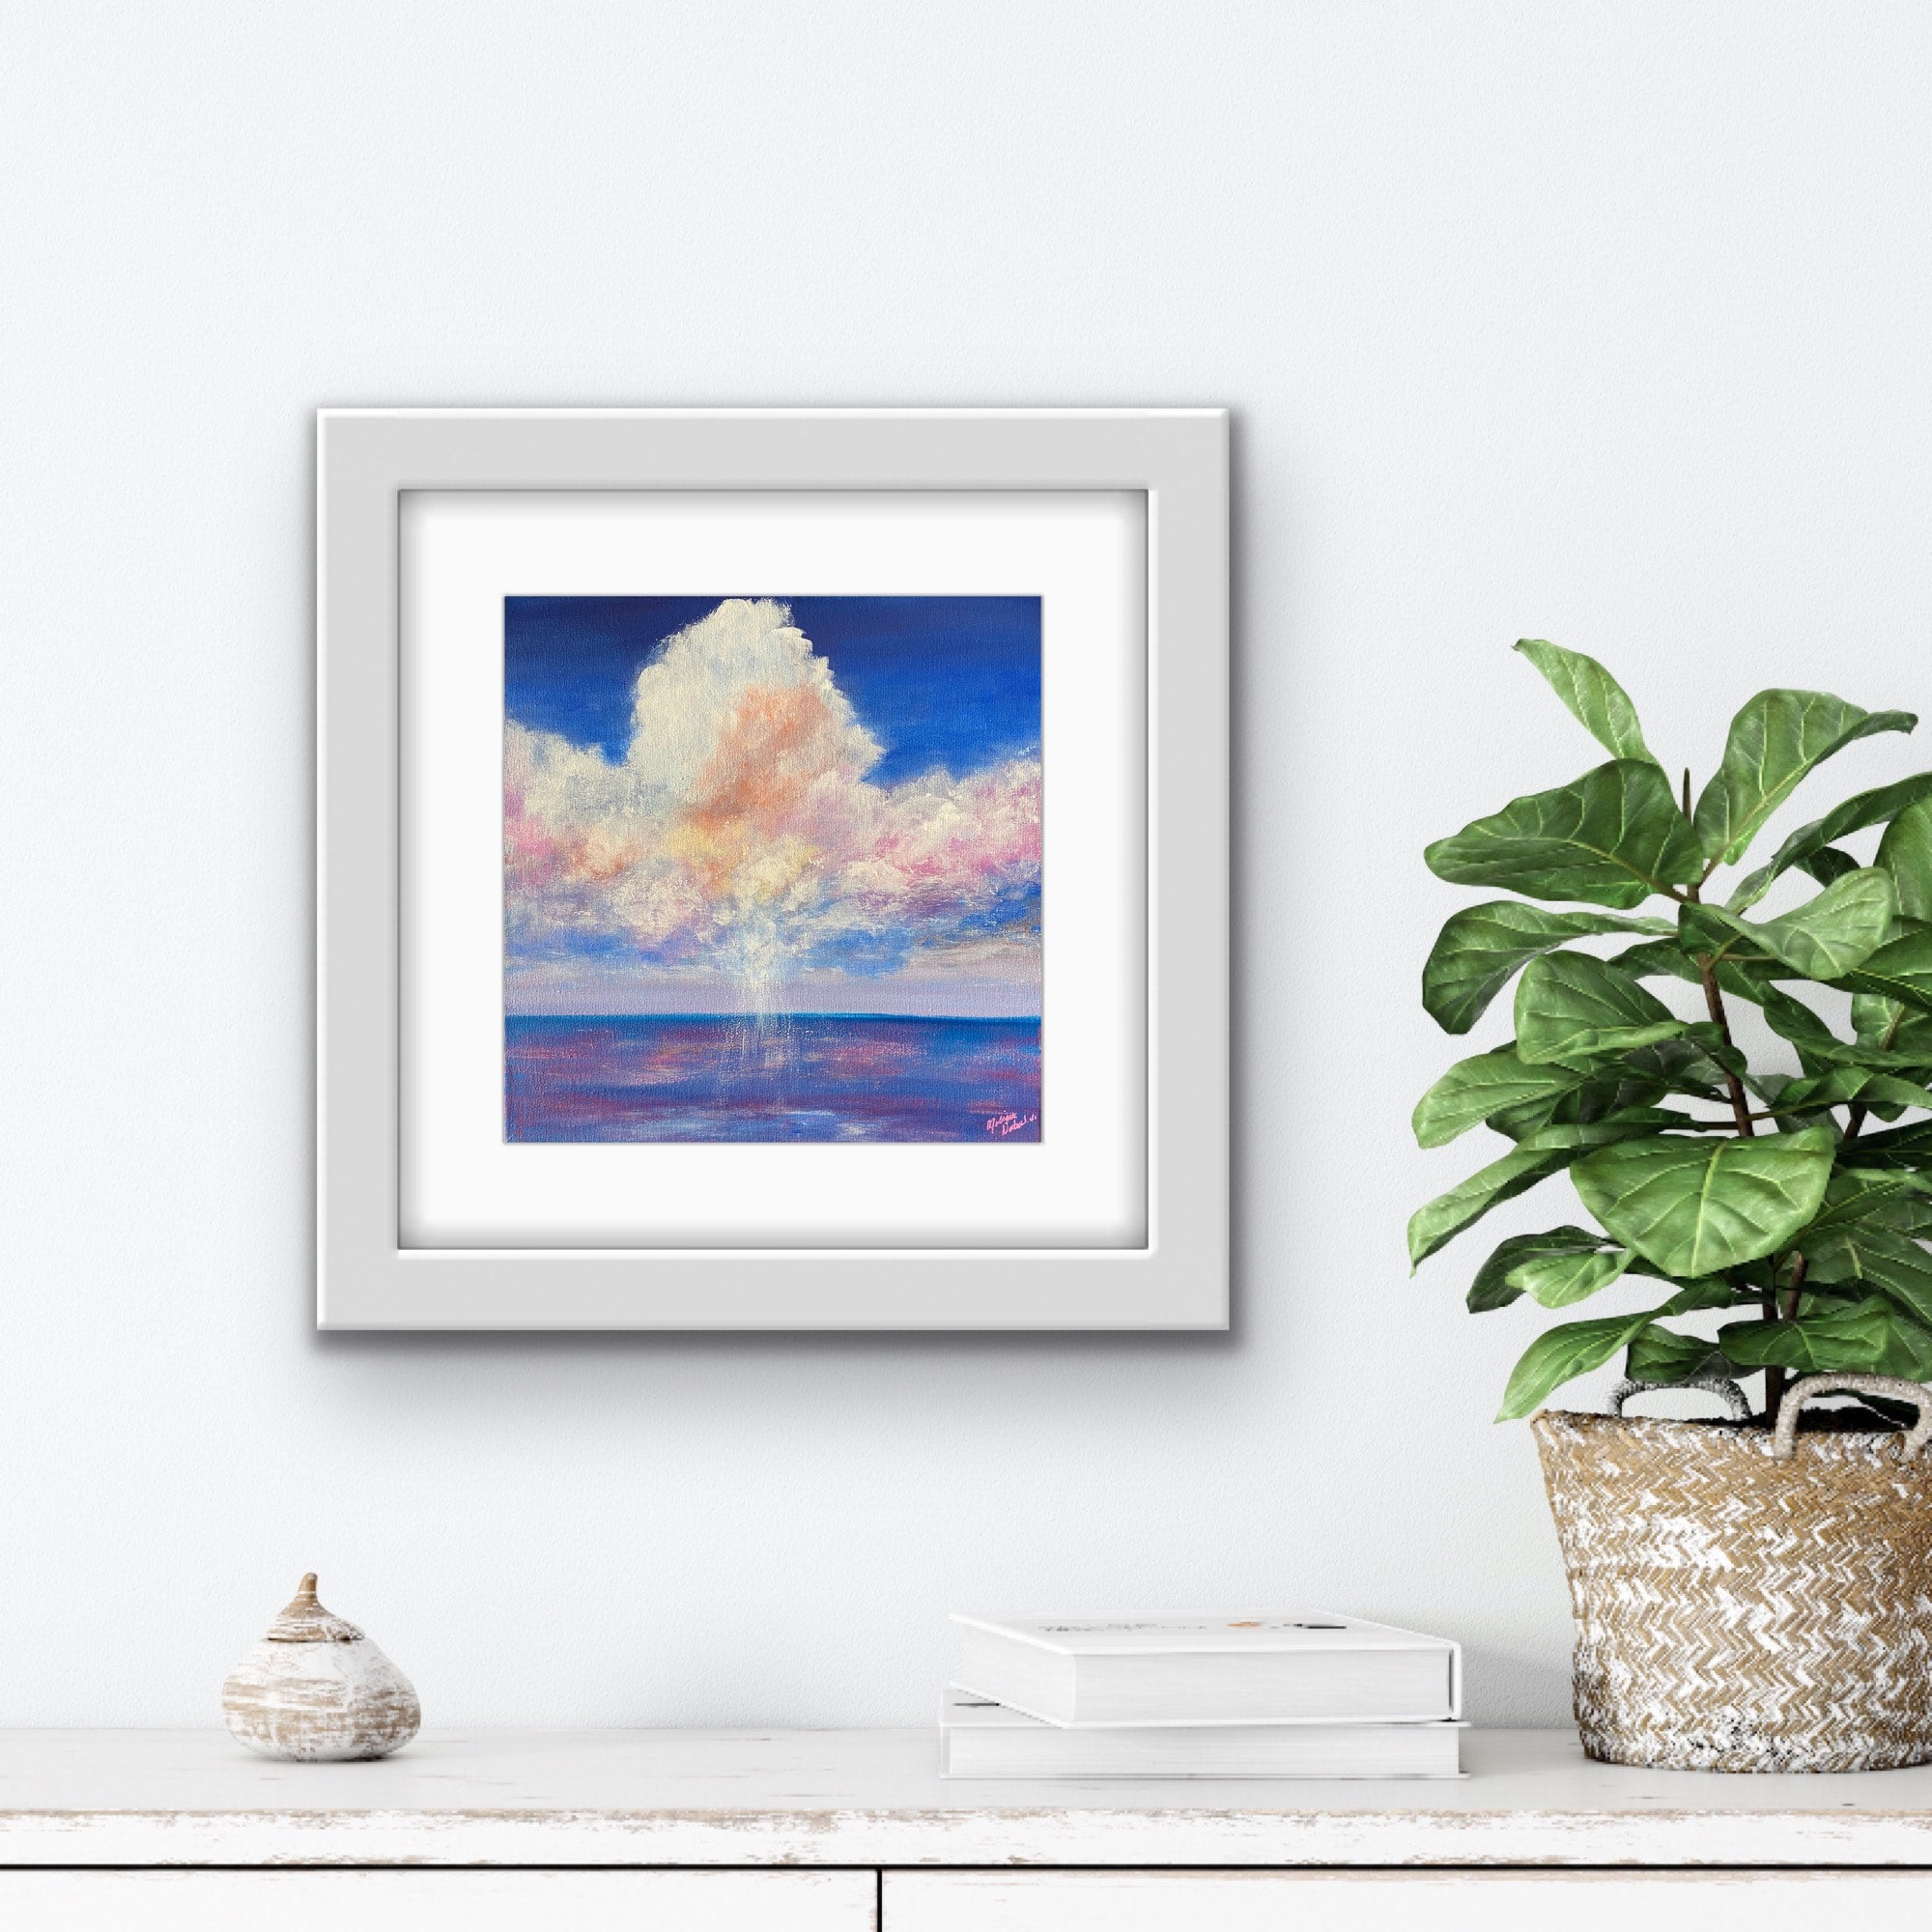 WATERCOLOR CANVAS PRINTS Any 8x10 or 11x14 Canvas Print